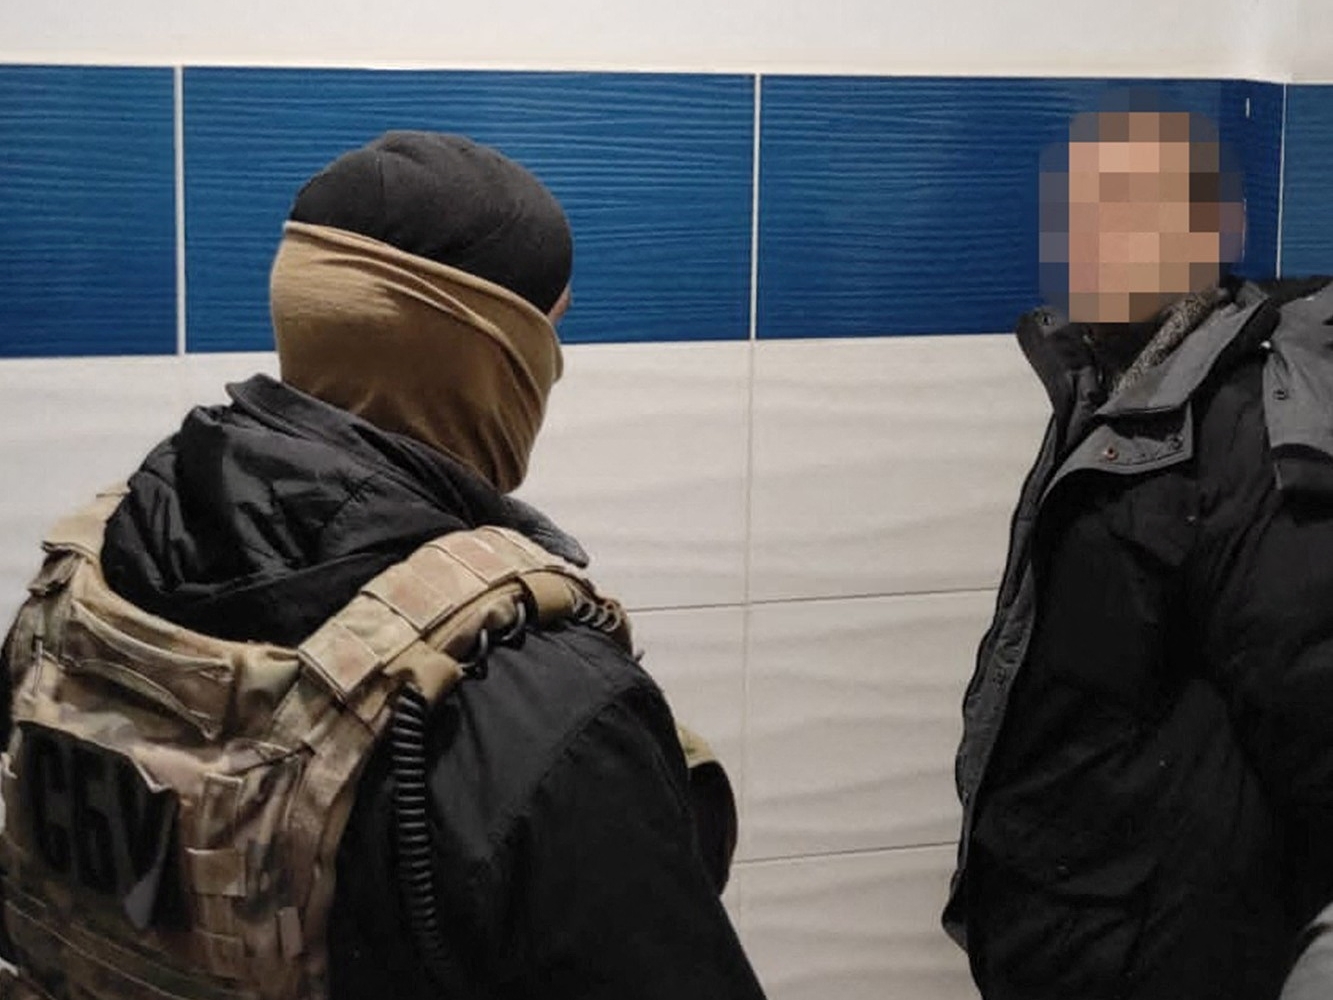 A man who, according to the State Security Service of Ukraine, is a Russian military intelligence agent, is detained in an unknown location